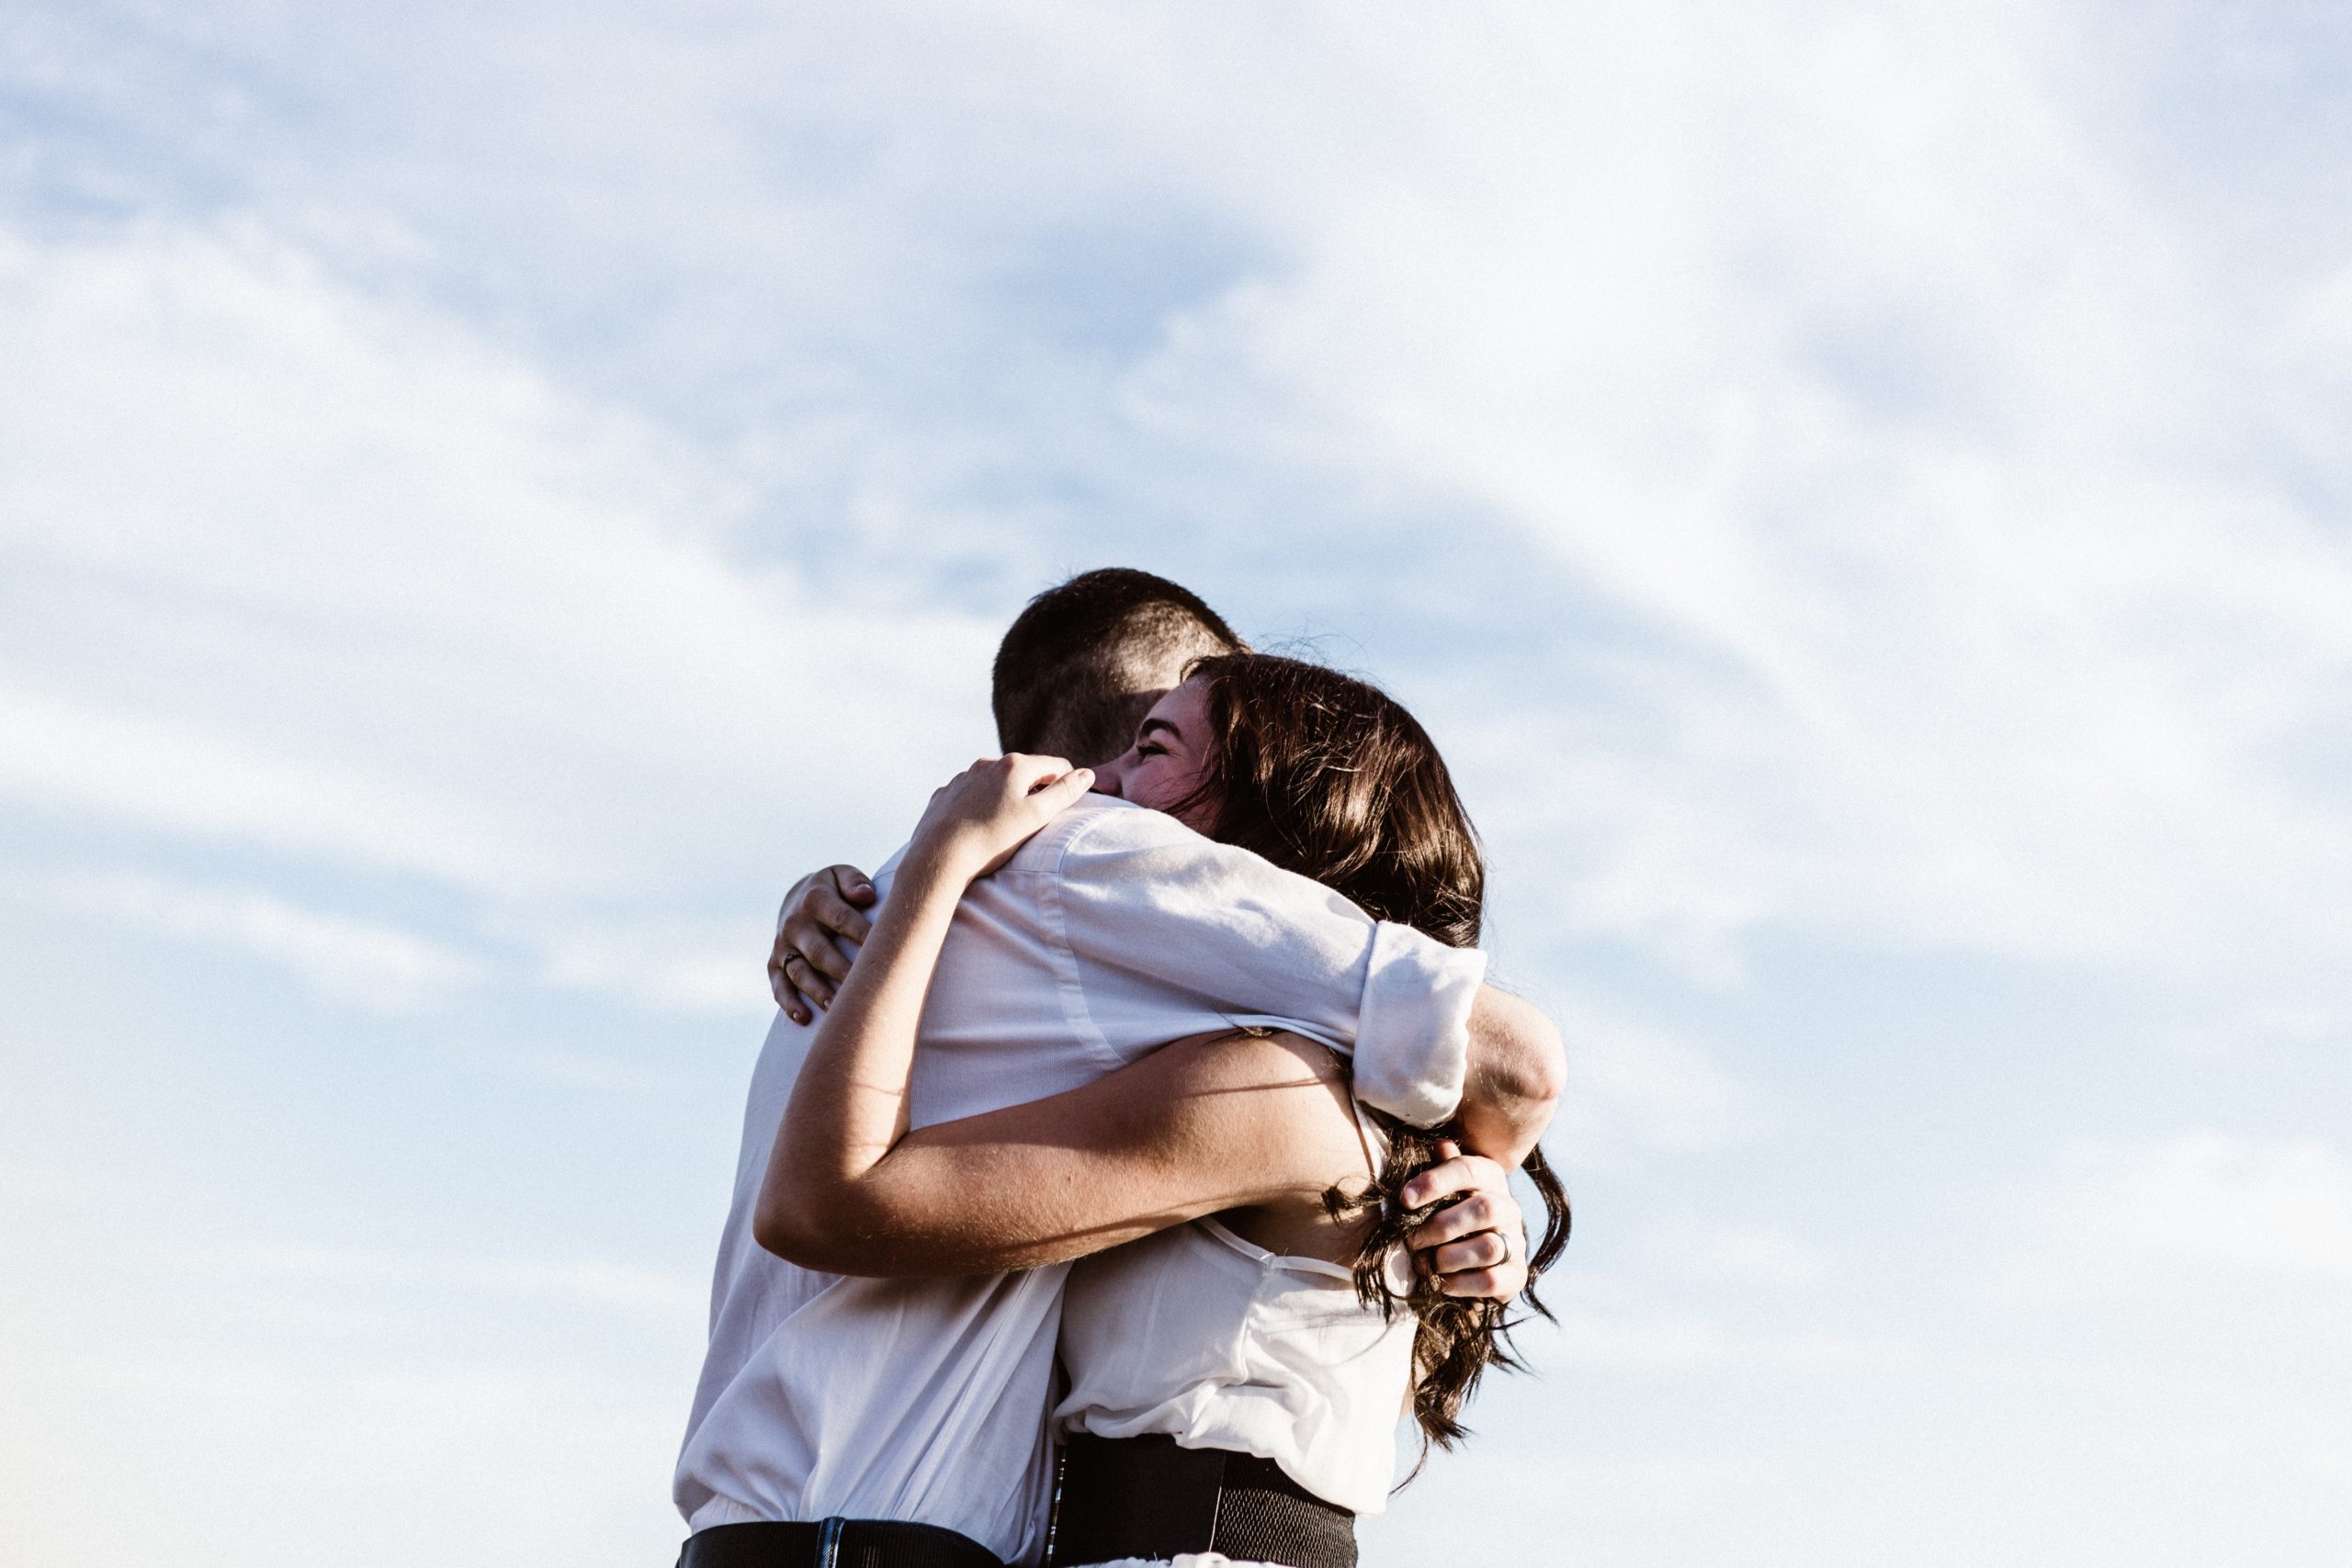 7 Things That You Need To Do to have a Healthy Relationship